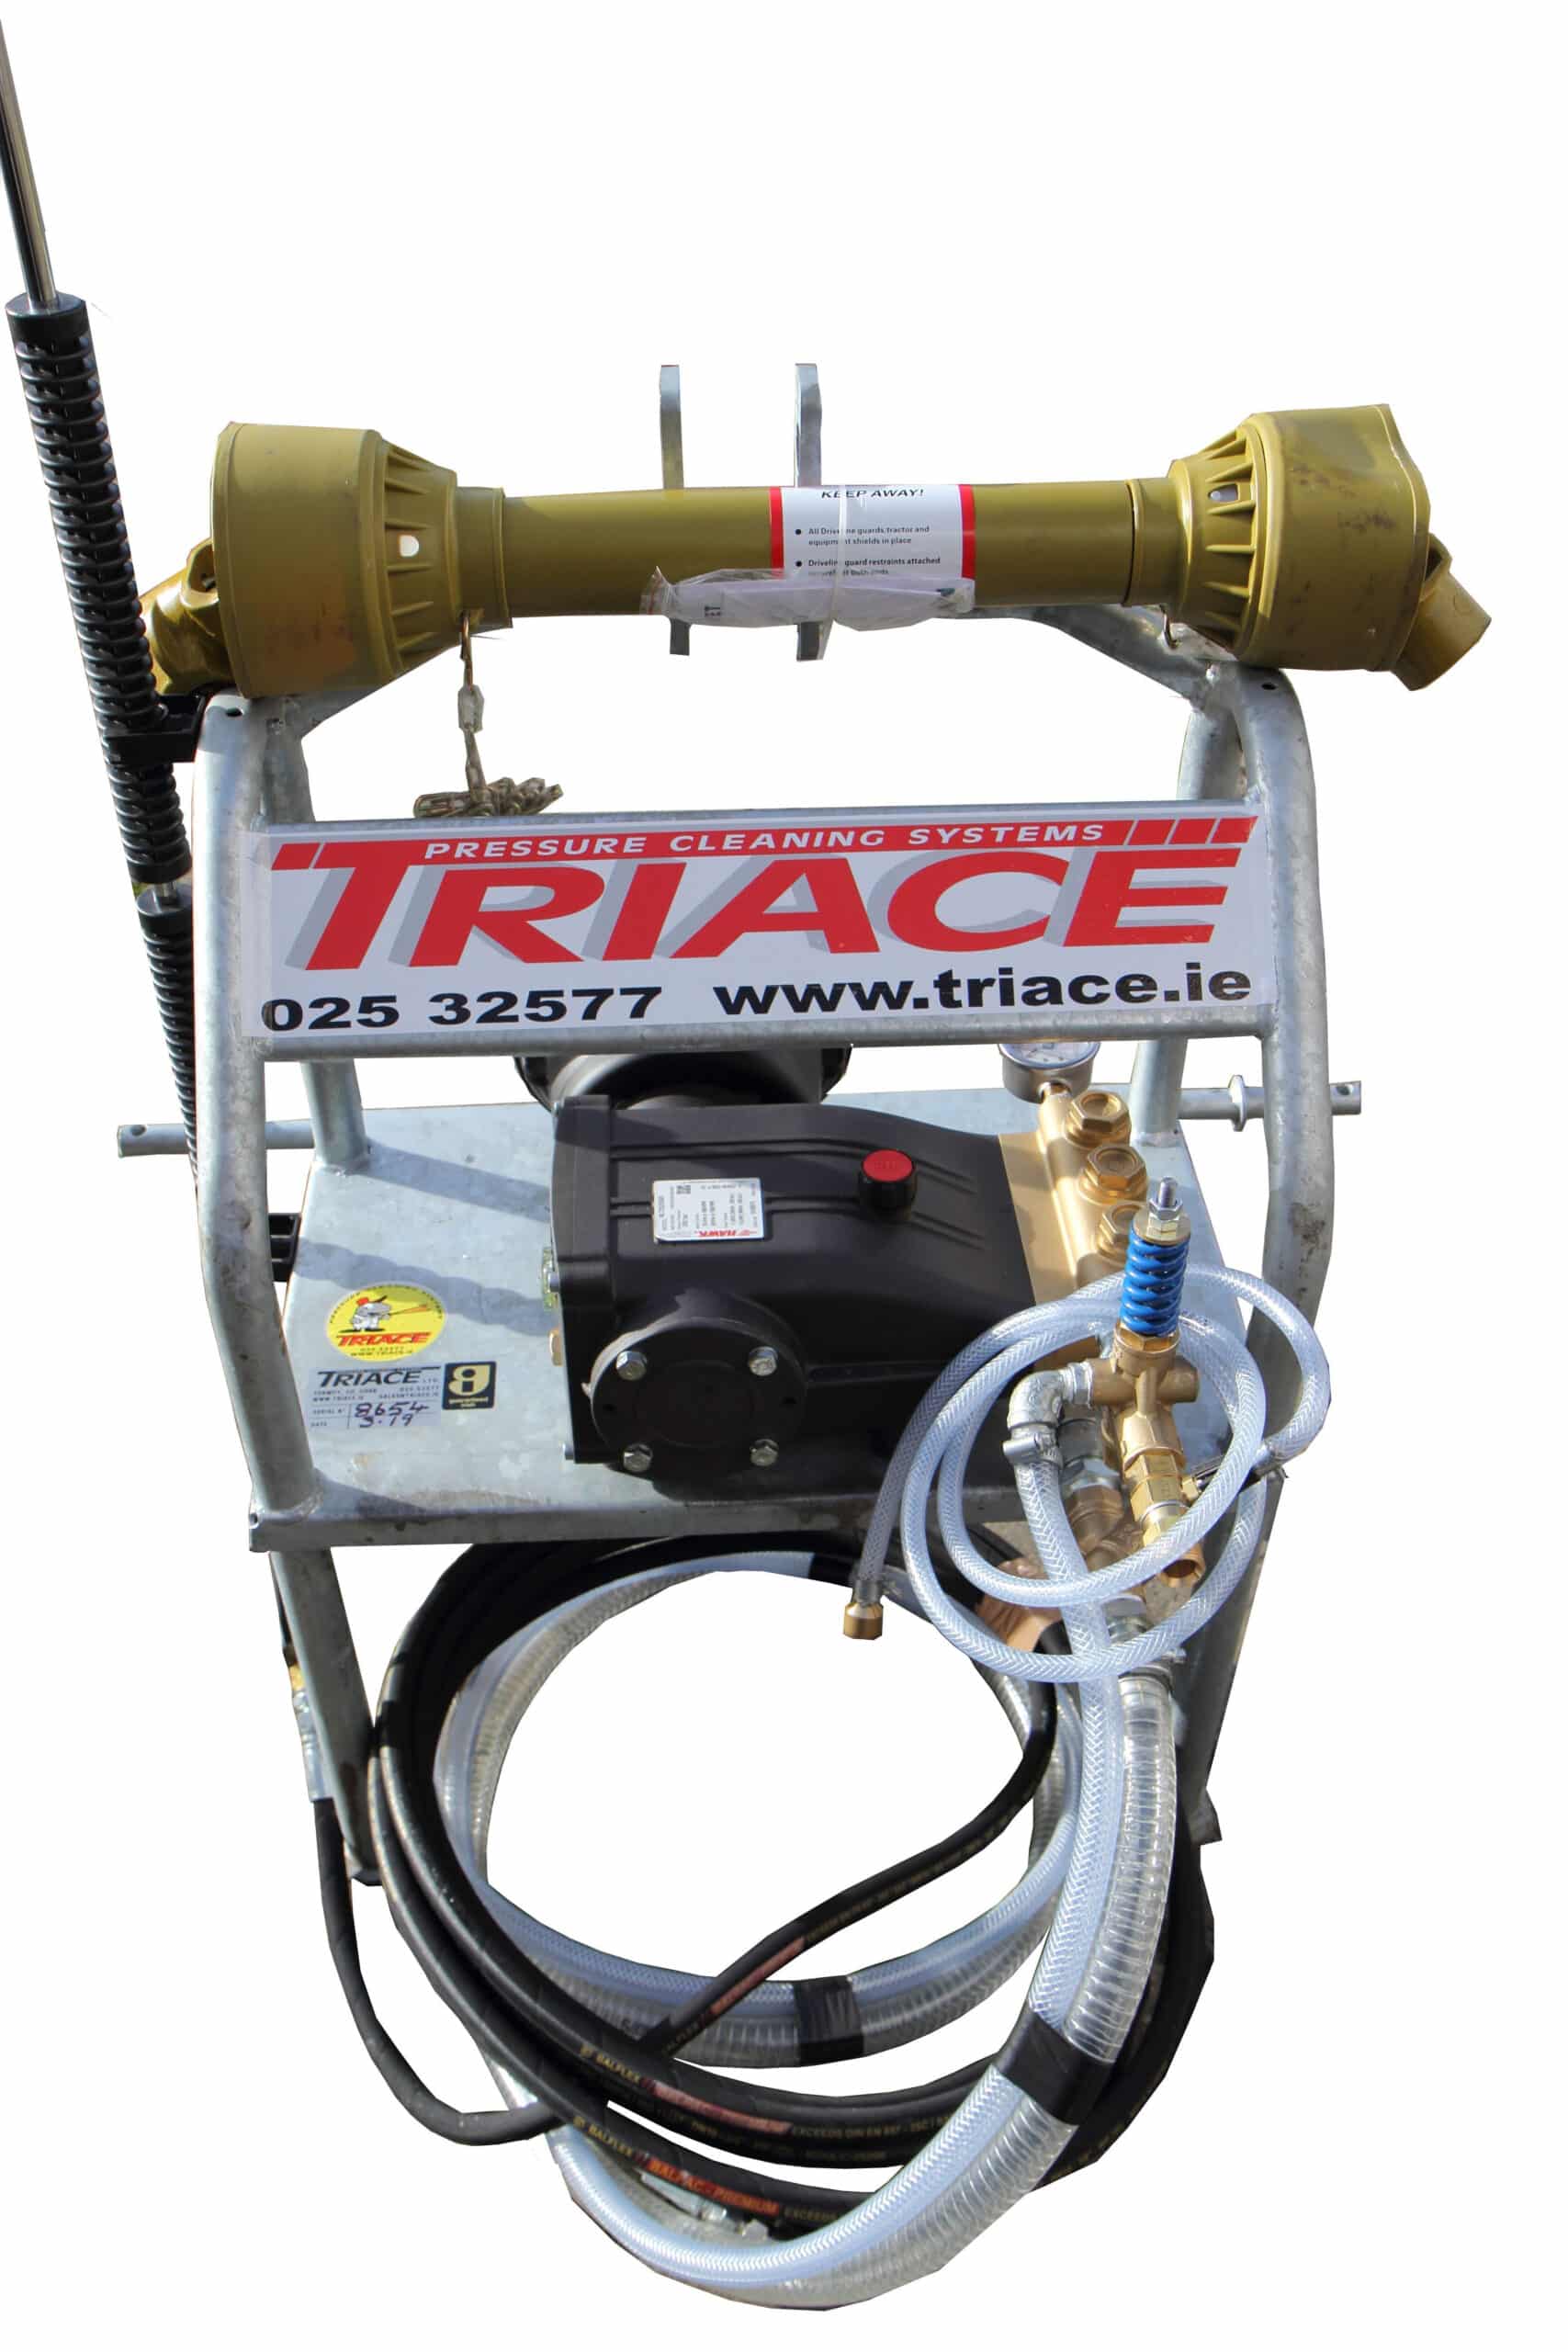 Triace NLT2525 Tractor PTO Pressure Washer with NLT2525 Hawk Pump (540/1000 RPM) Heavy-Duty Farm & Equipment Cleaning | Pressure Gauge, 1200mm Lance - Triace